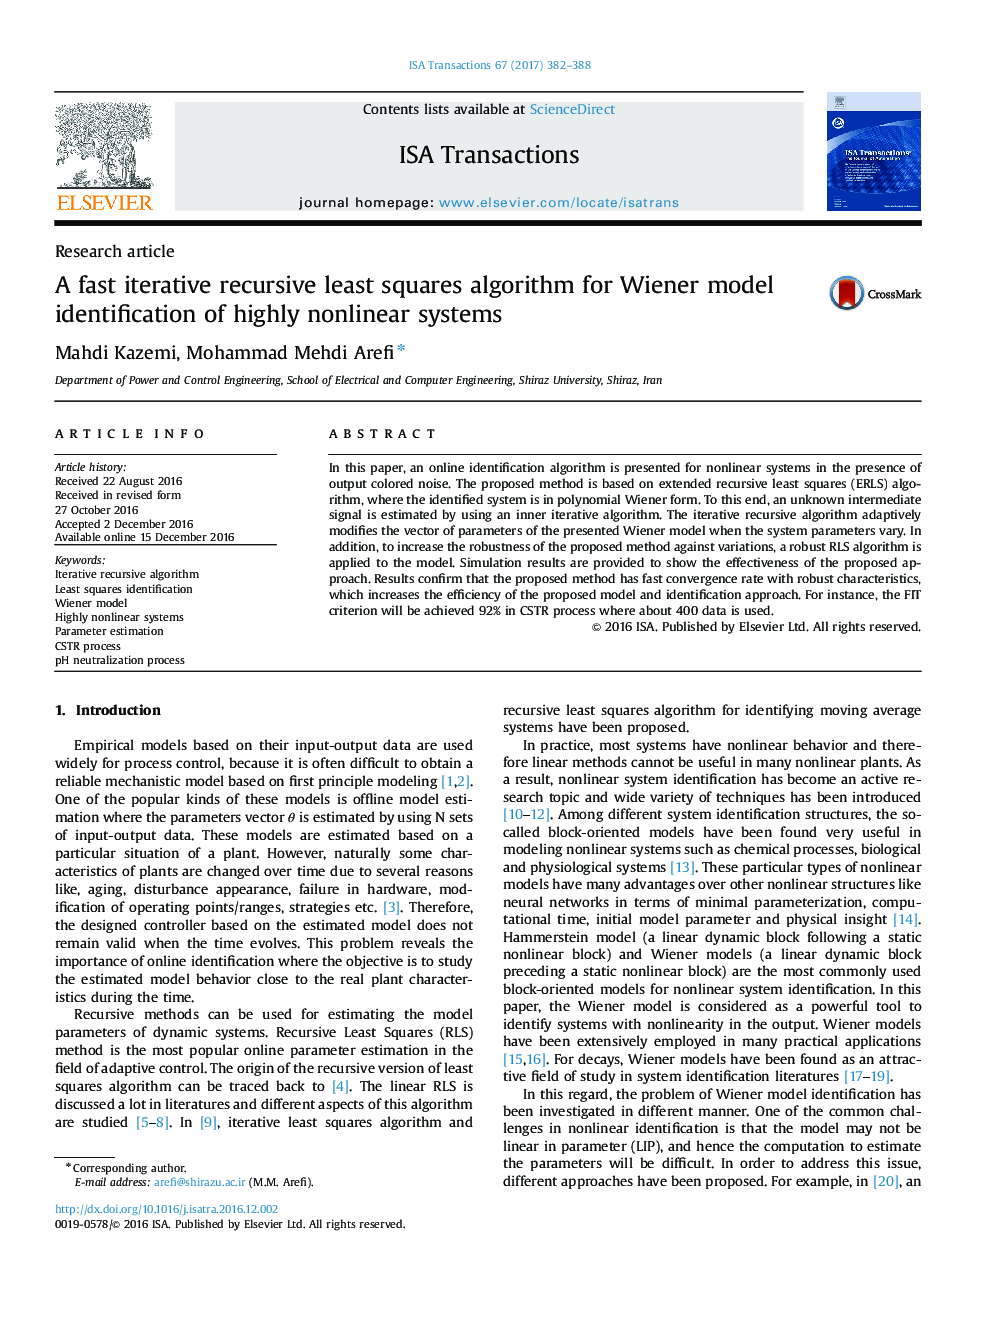 Research articleA fast iterative recursive least squares algorithm for Wiener model identification of highly nonlinear systems